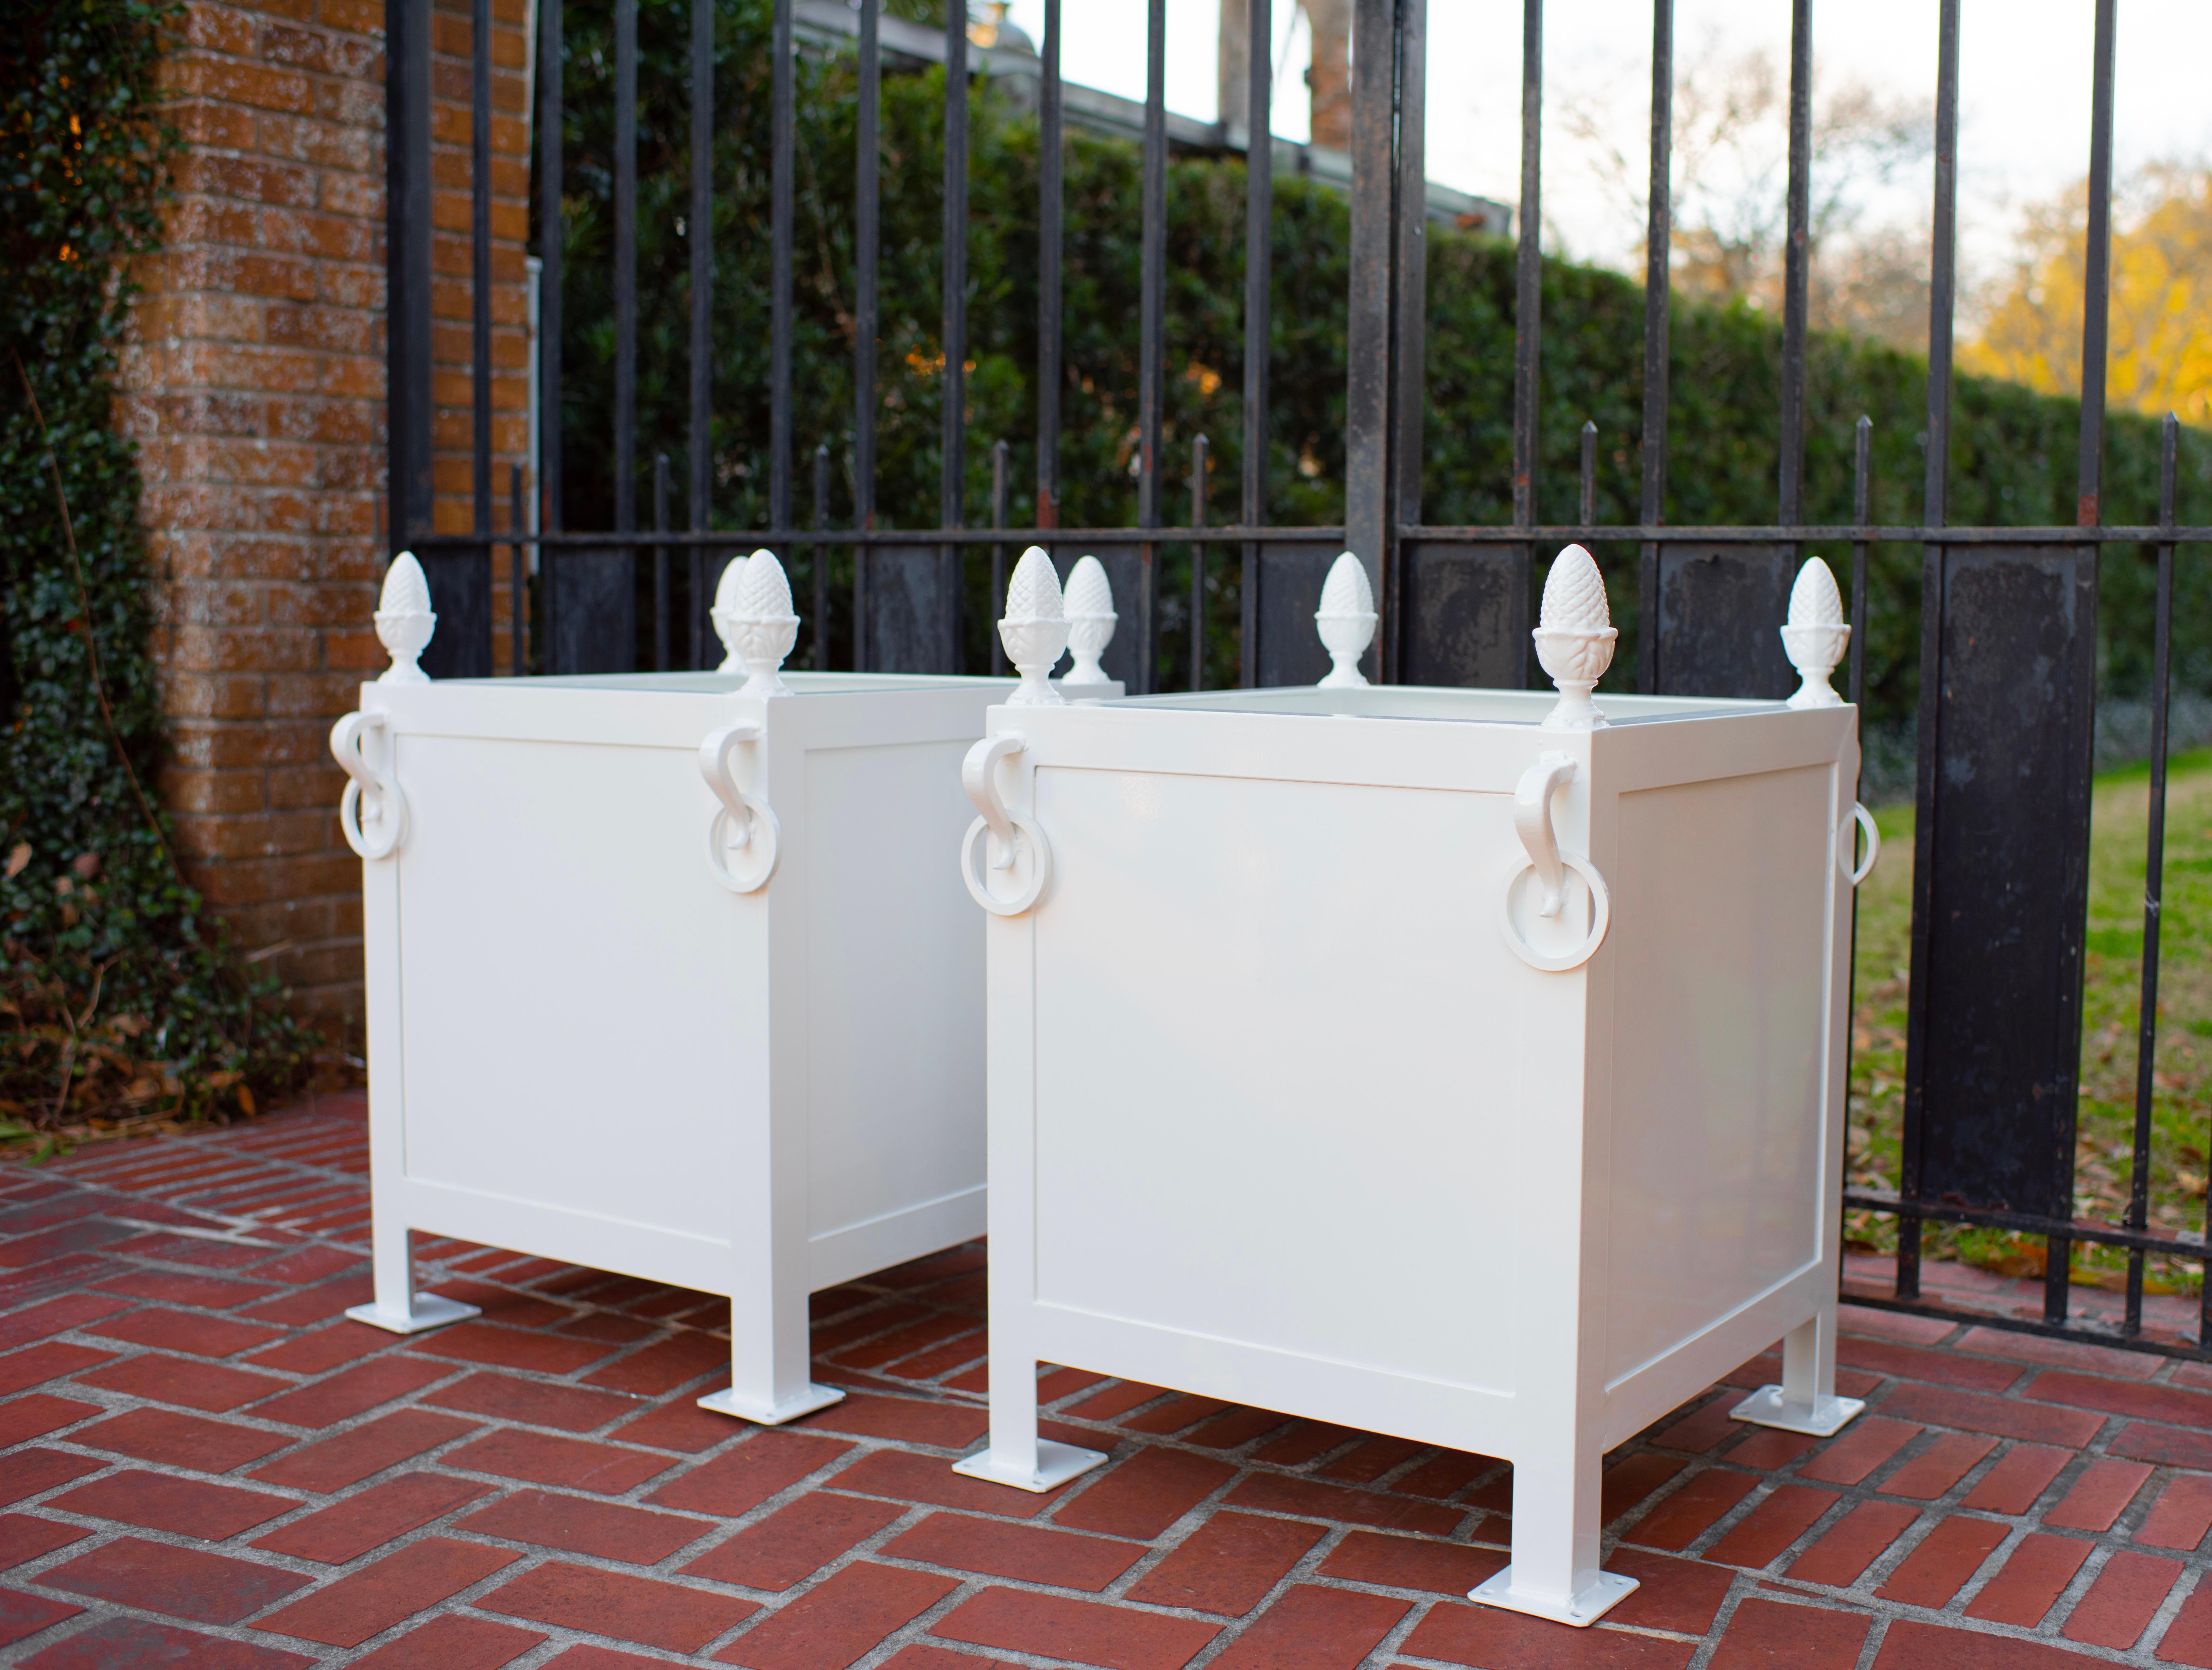 Pair of Large Square French Style steel and cast iron orangerie planter boxes in lacquered white (as these are custom made to order, customers may request any color from the Benjamin Moore collection). Handcrafted in New Orleans by local metalsmiths